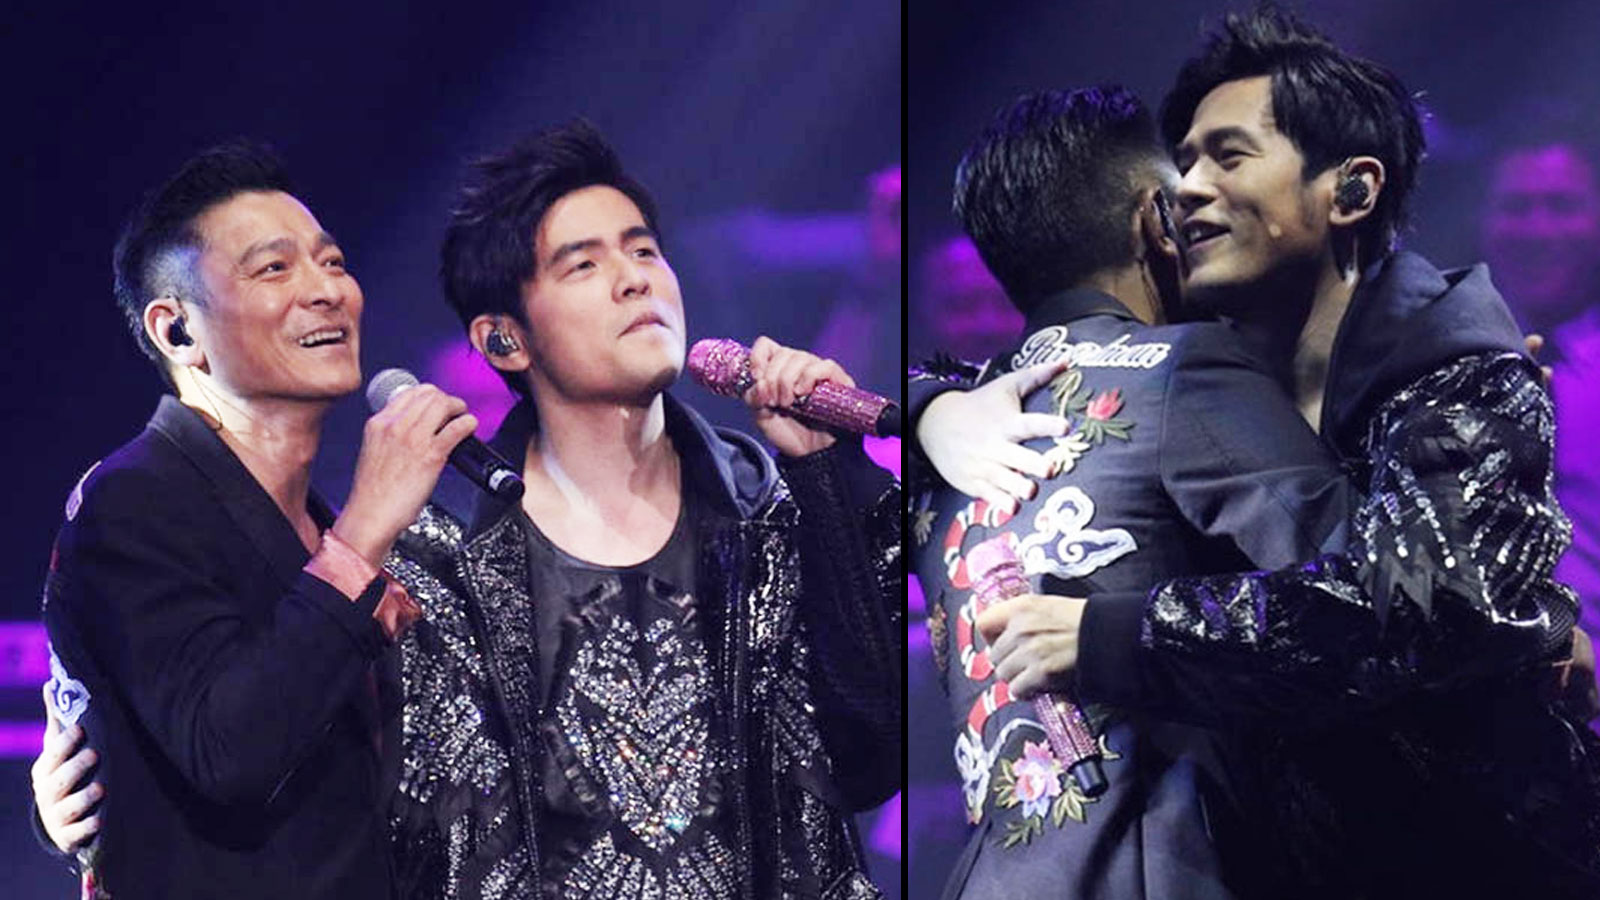 Jay Chou shares the stage with Andy Lau in Hong Kong 8days